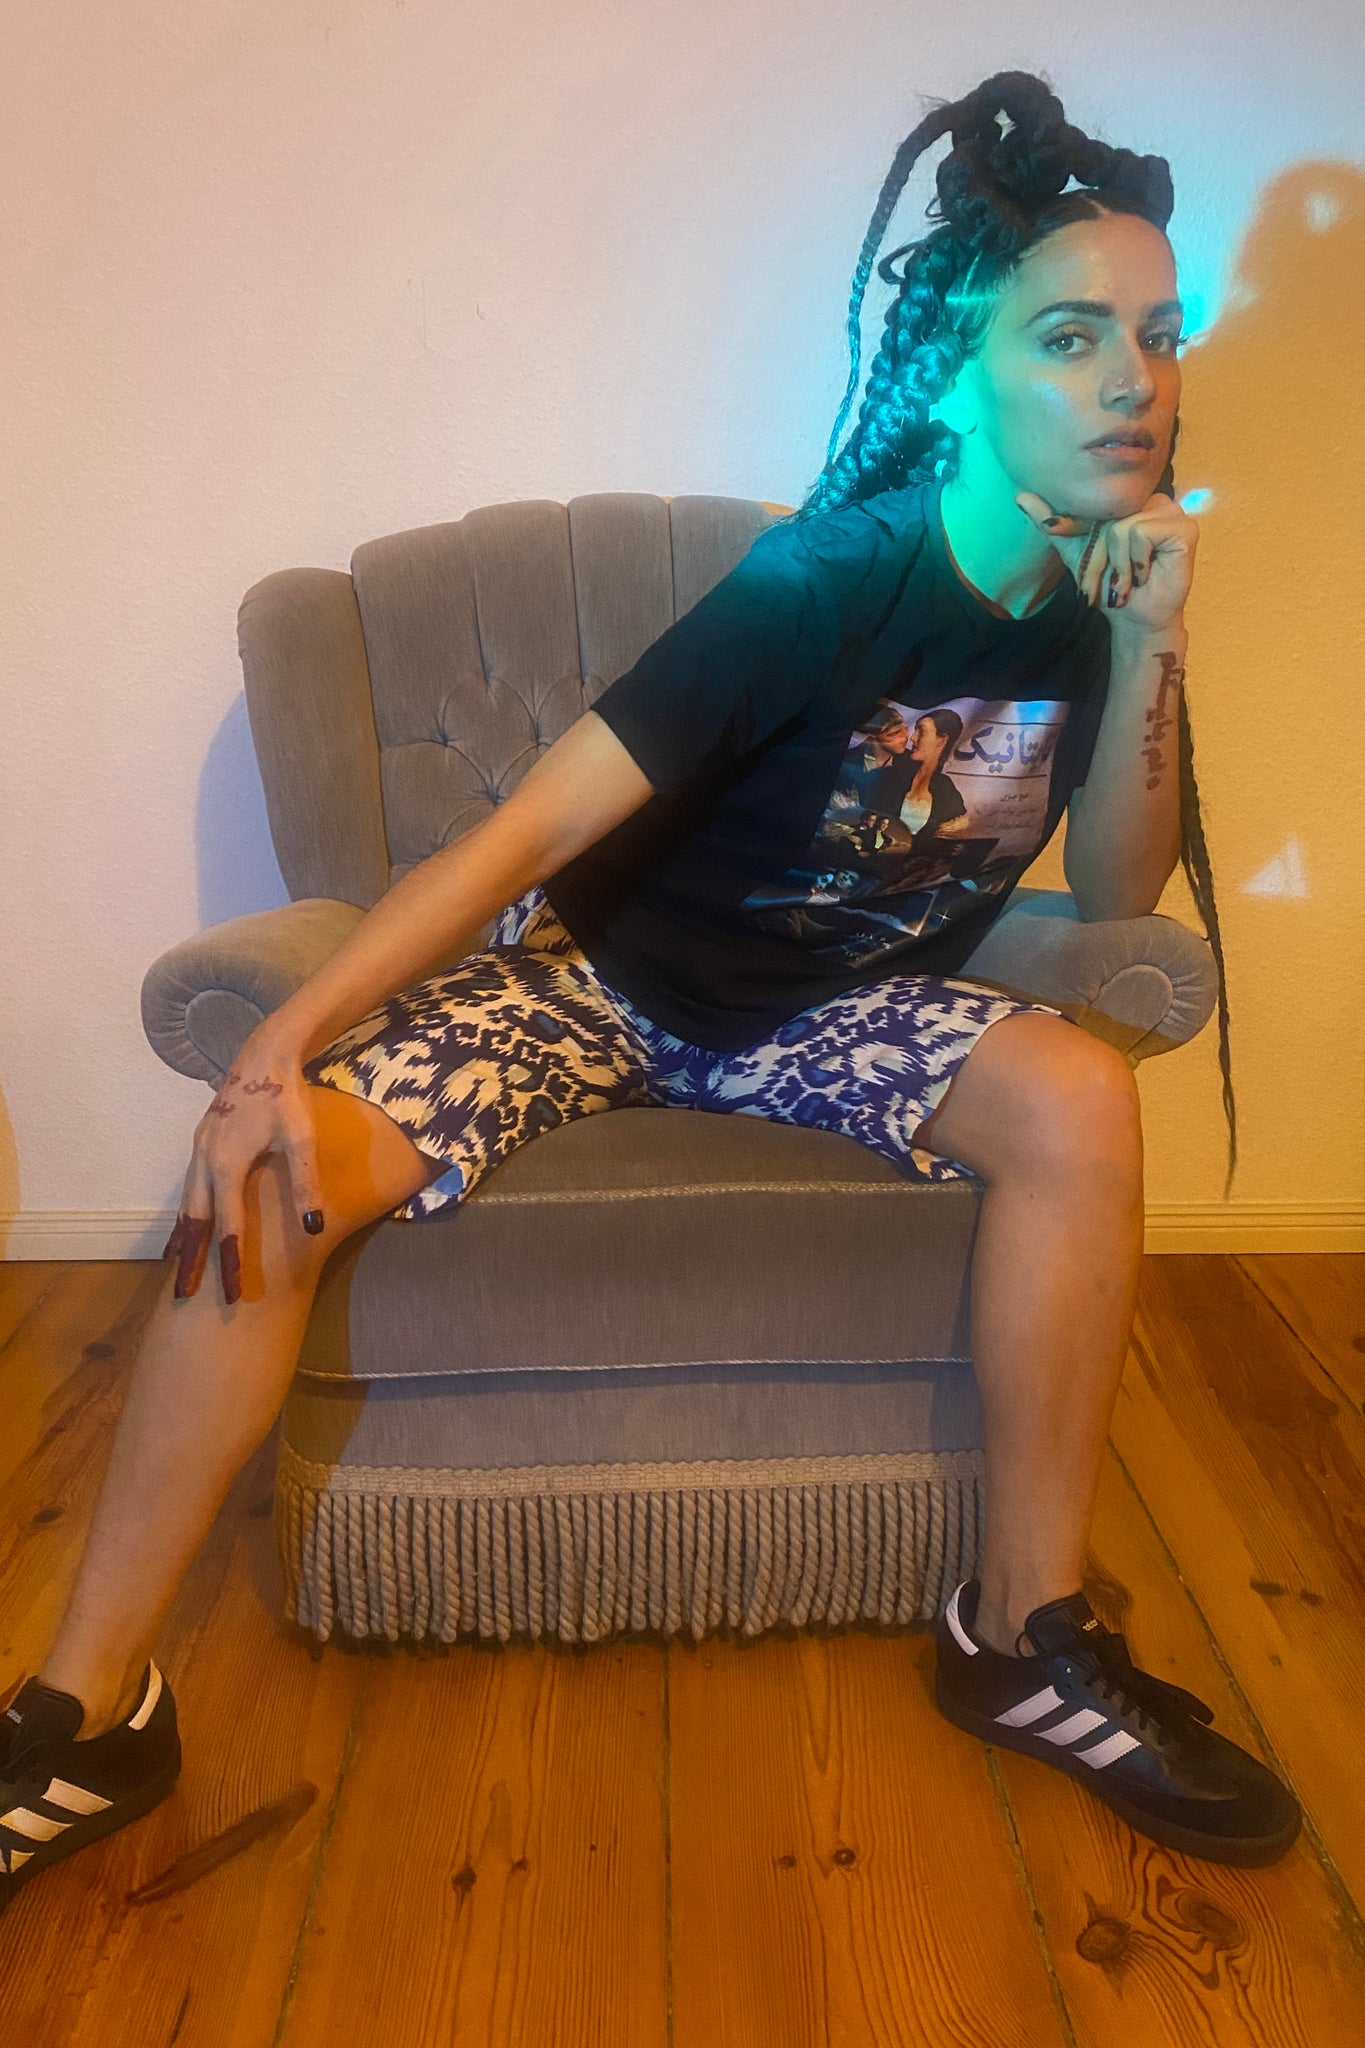 A green light shines on a woman on a grey chair, wearing Adidas Sambas, a Titanic graphic tee, and adras/ikat capris